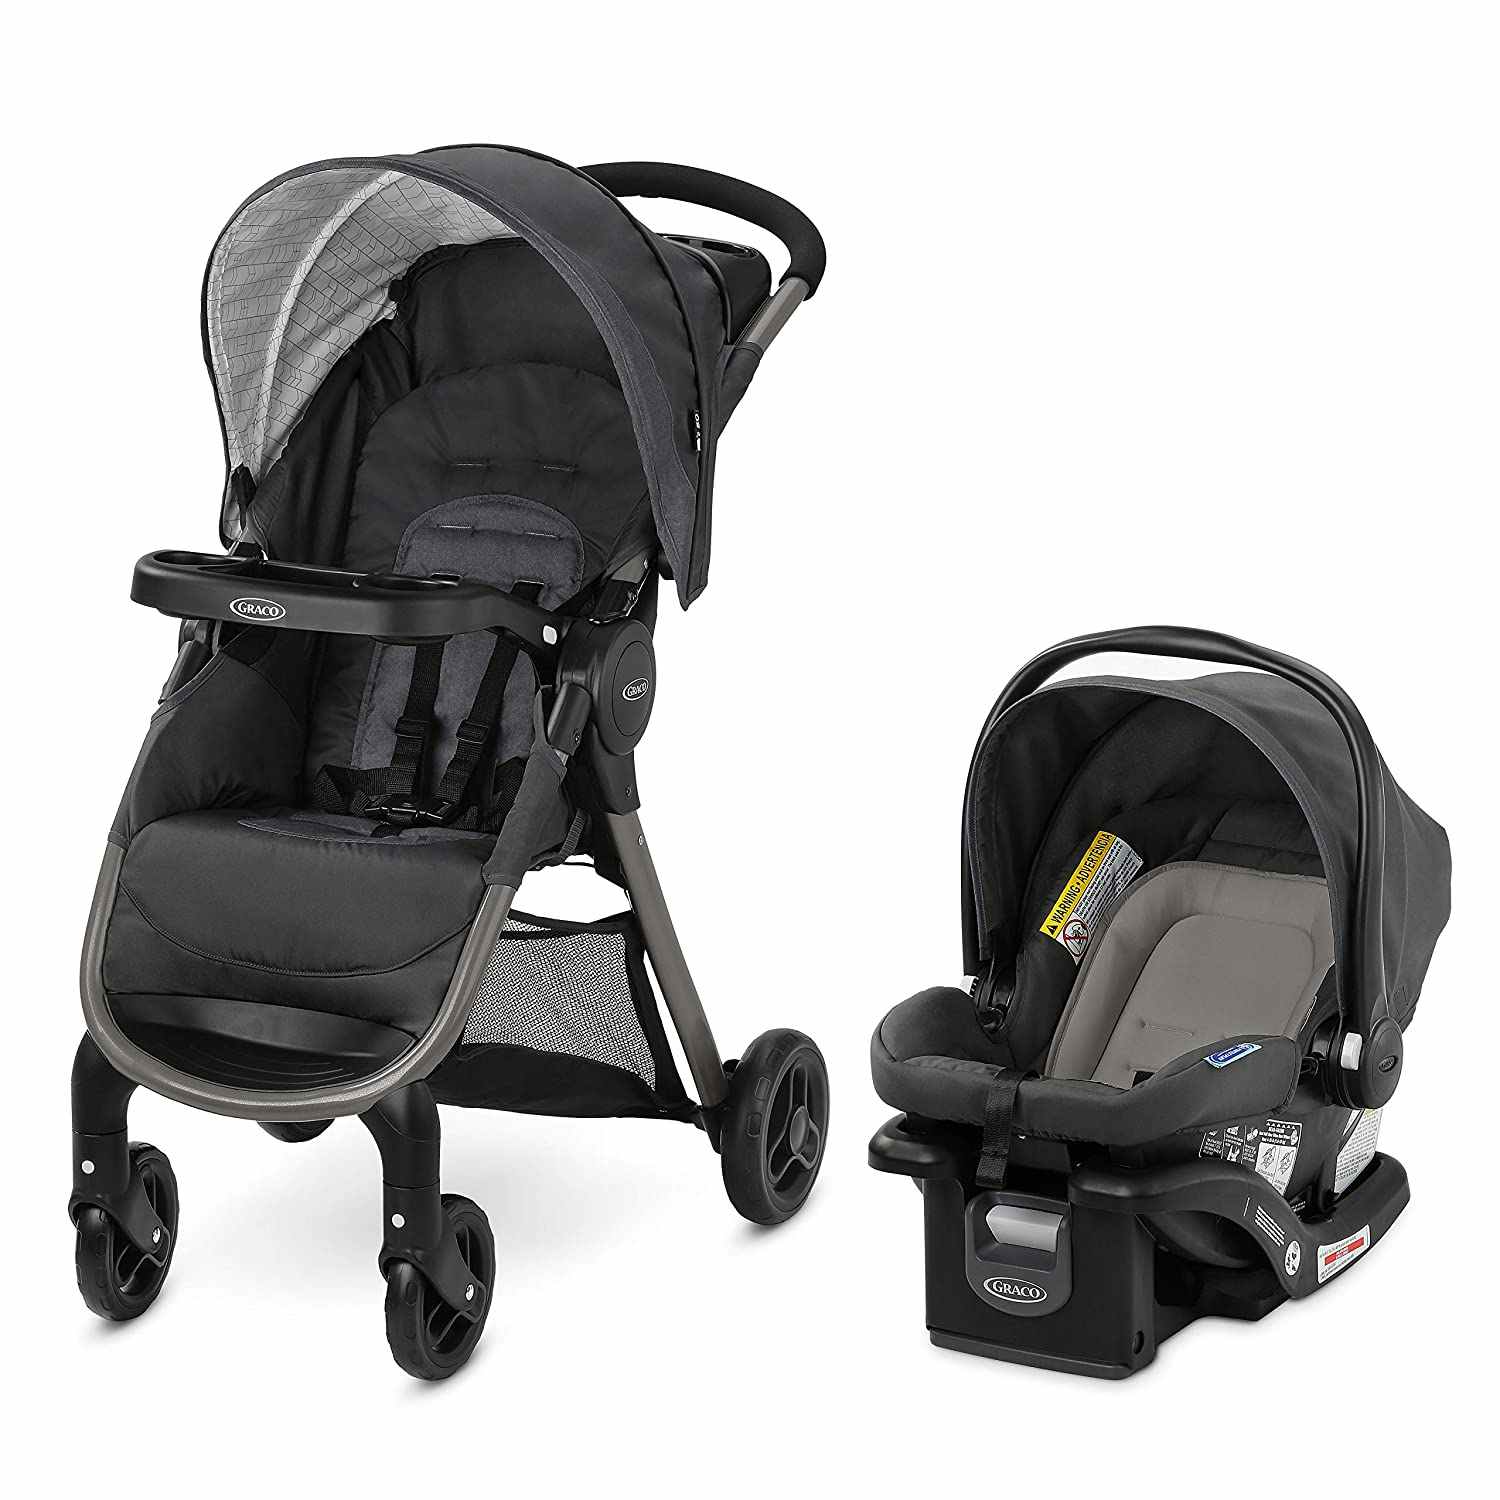 A Graco FastAction stroller and car seat travel system.